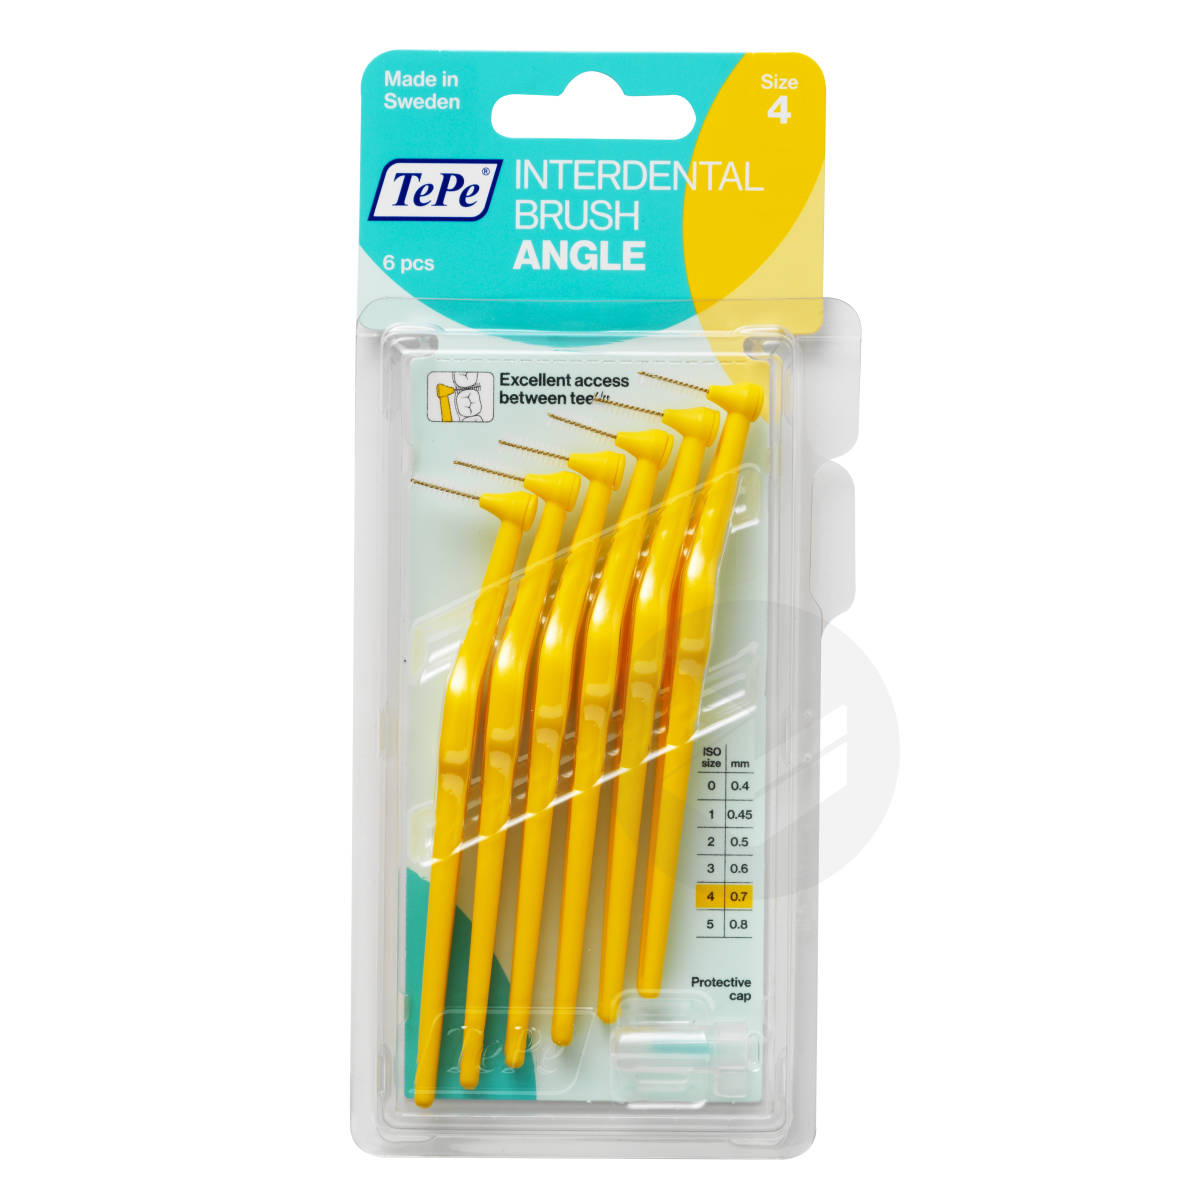 Brossettes Interdentaires Angle jaune 0.7mm ISO 4 x6